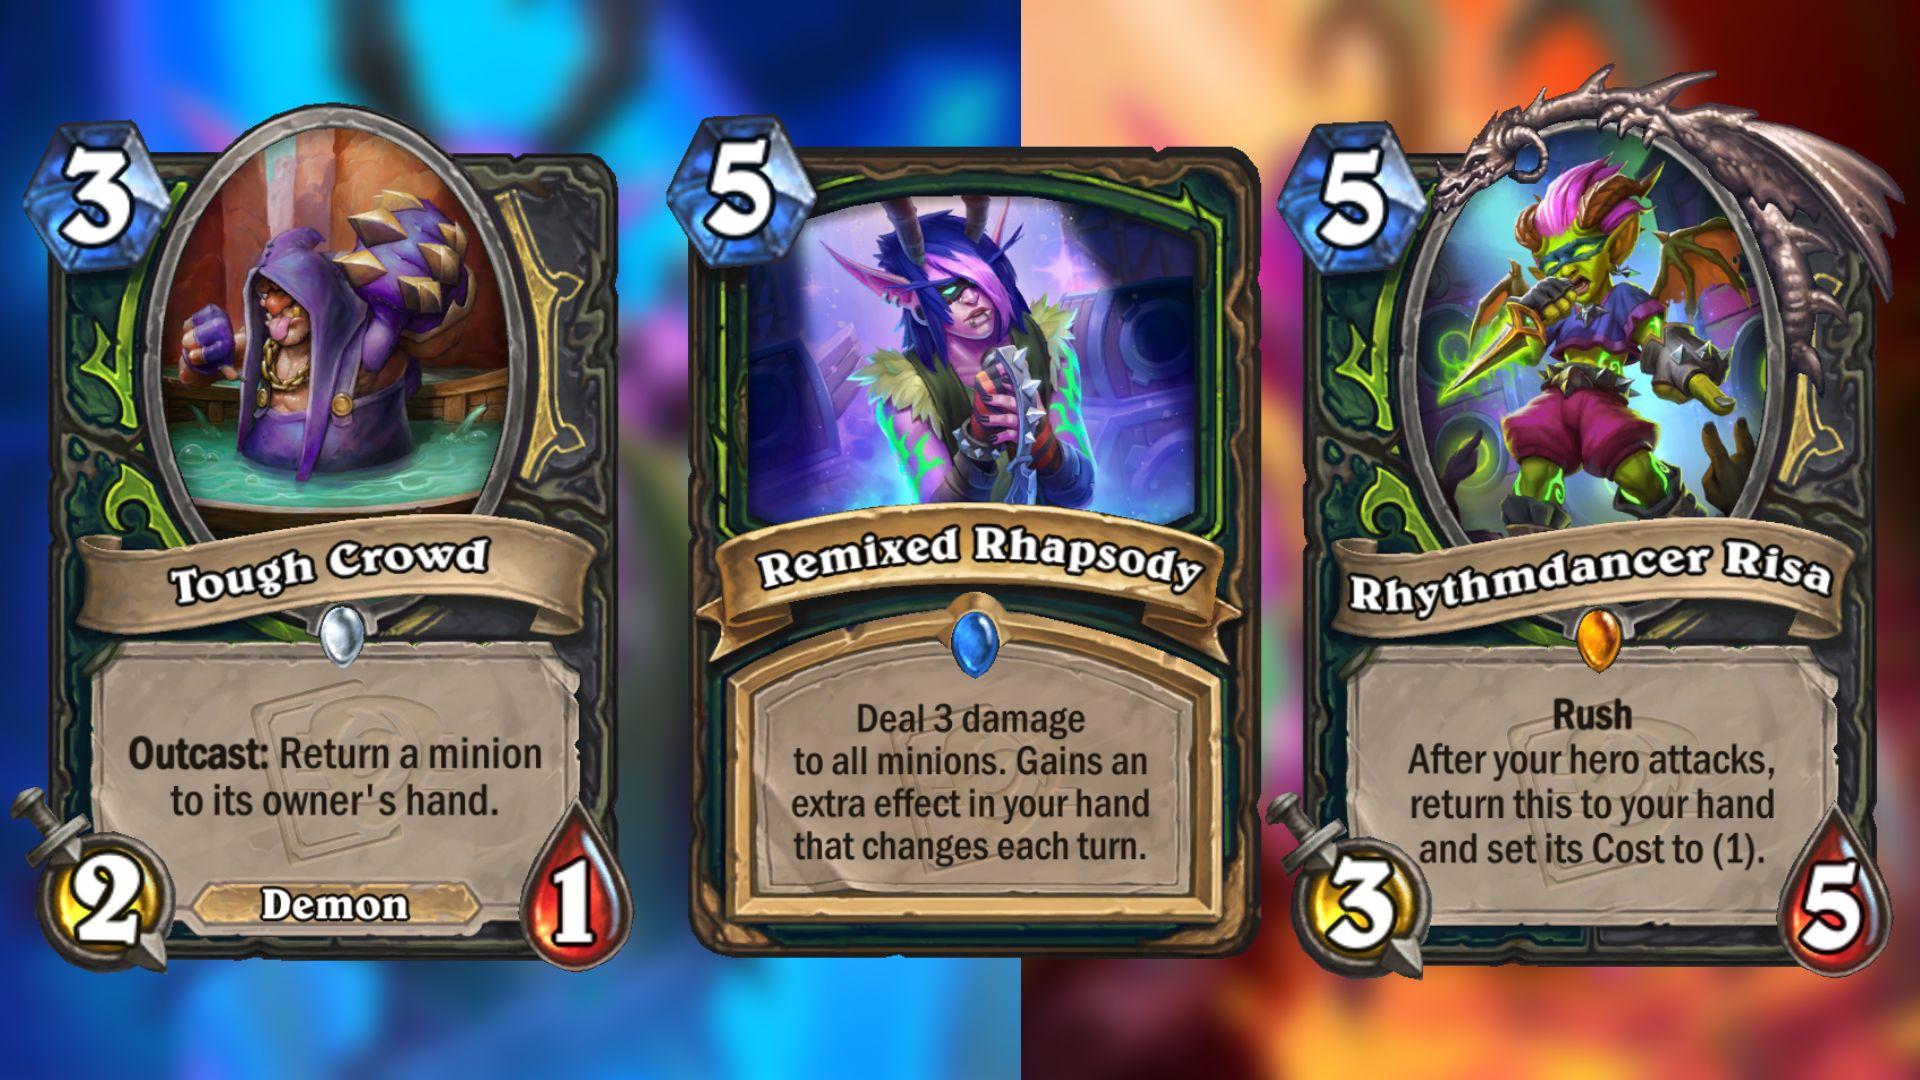 thoughts on the new cards:3